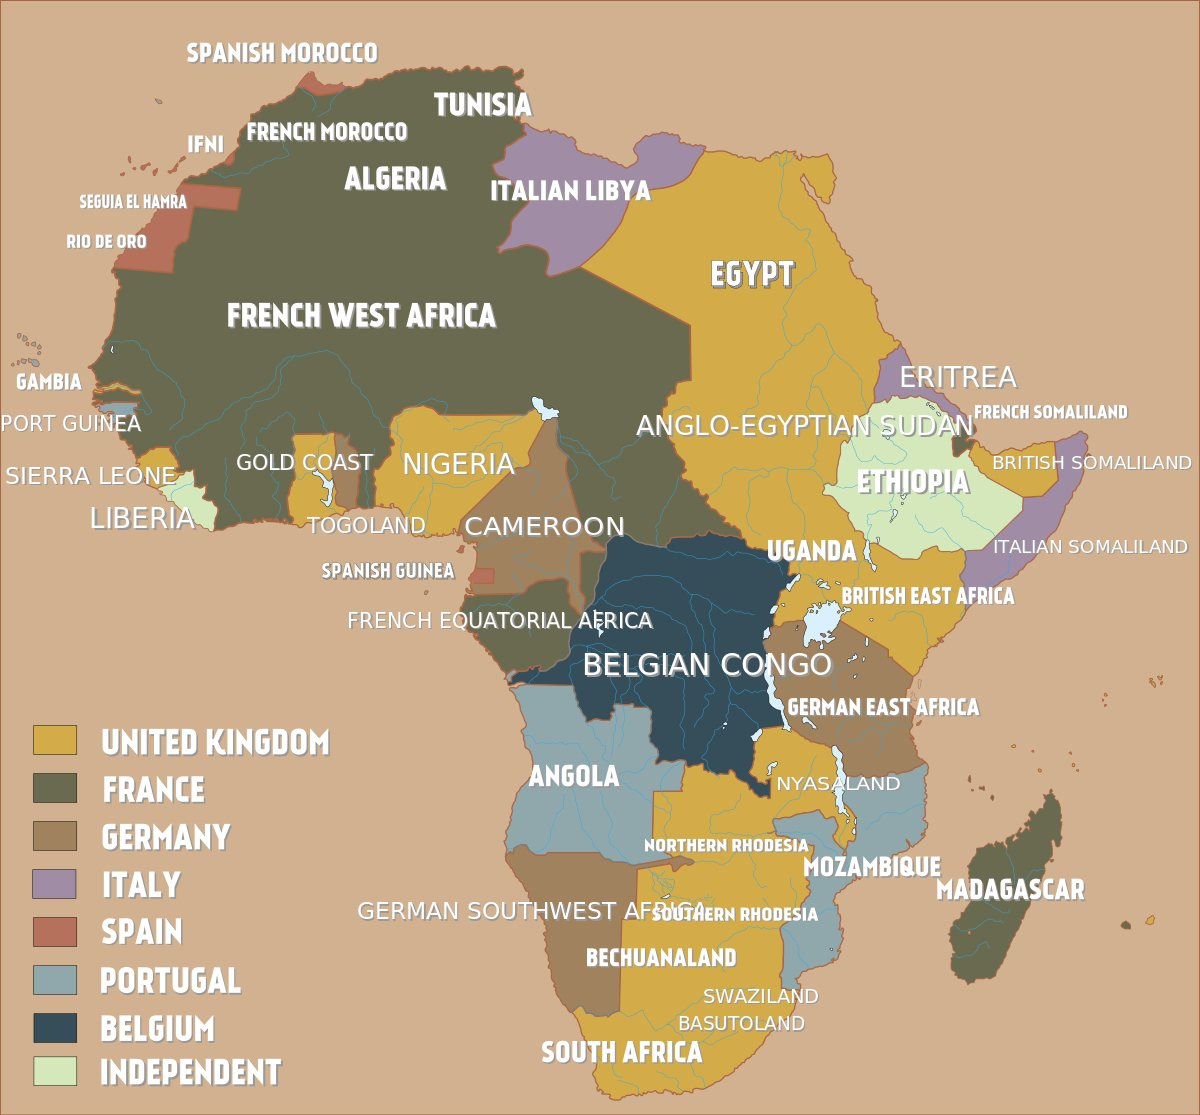 A map of Africa showing the Colonial Language divide